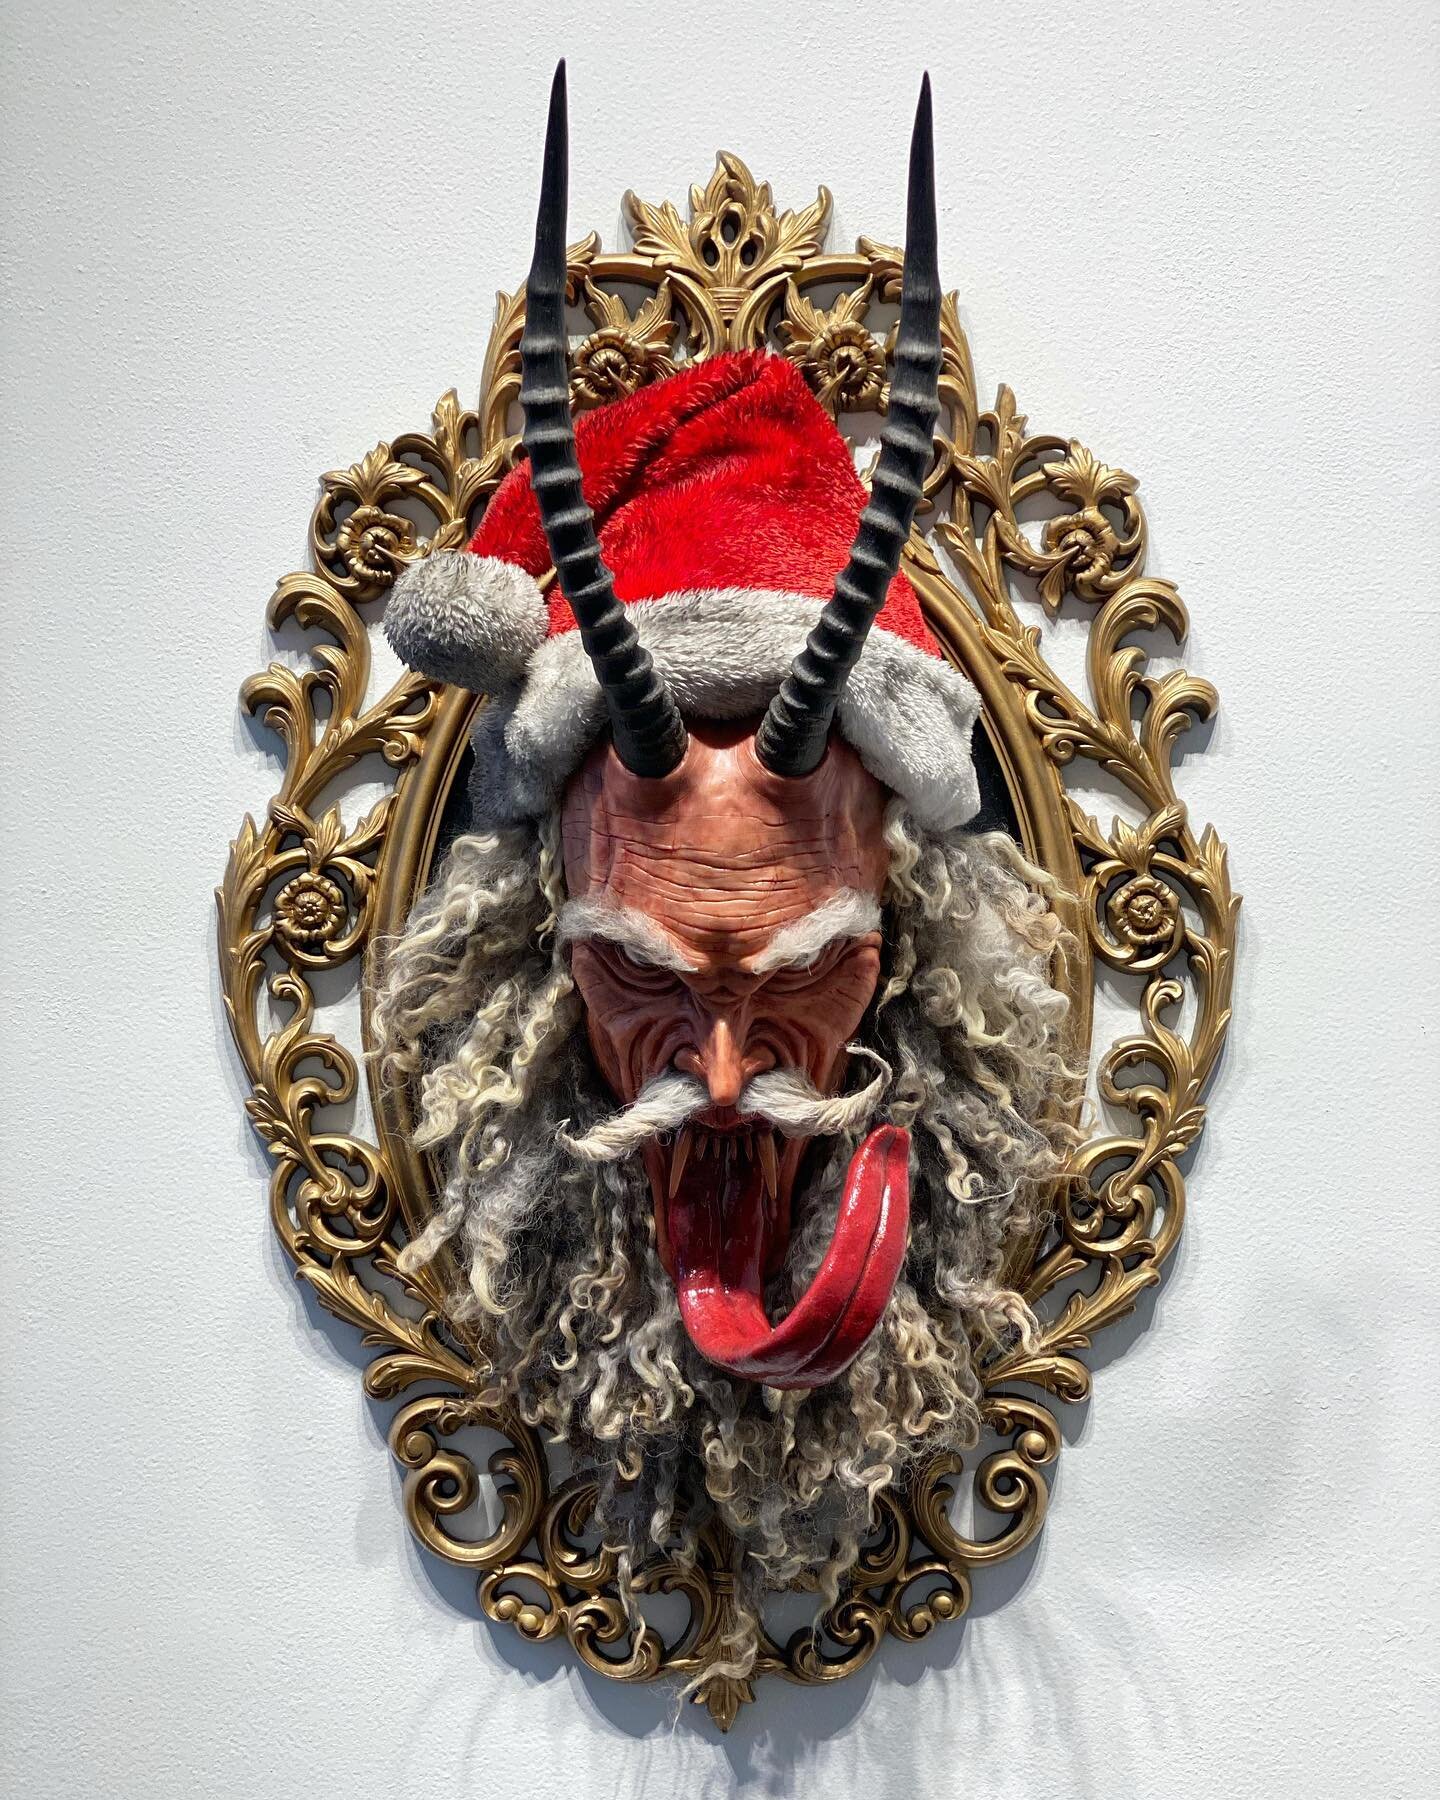 My clay sculpture in this years @rva_krampusnacht at @gallery5arts . Sculpted over top a real African Blesbok skull.